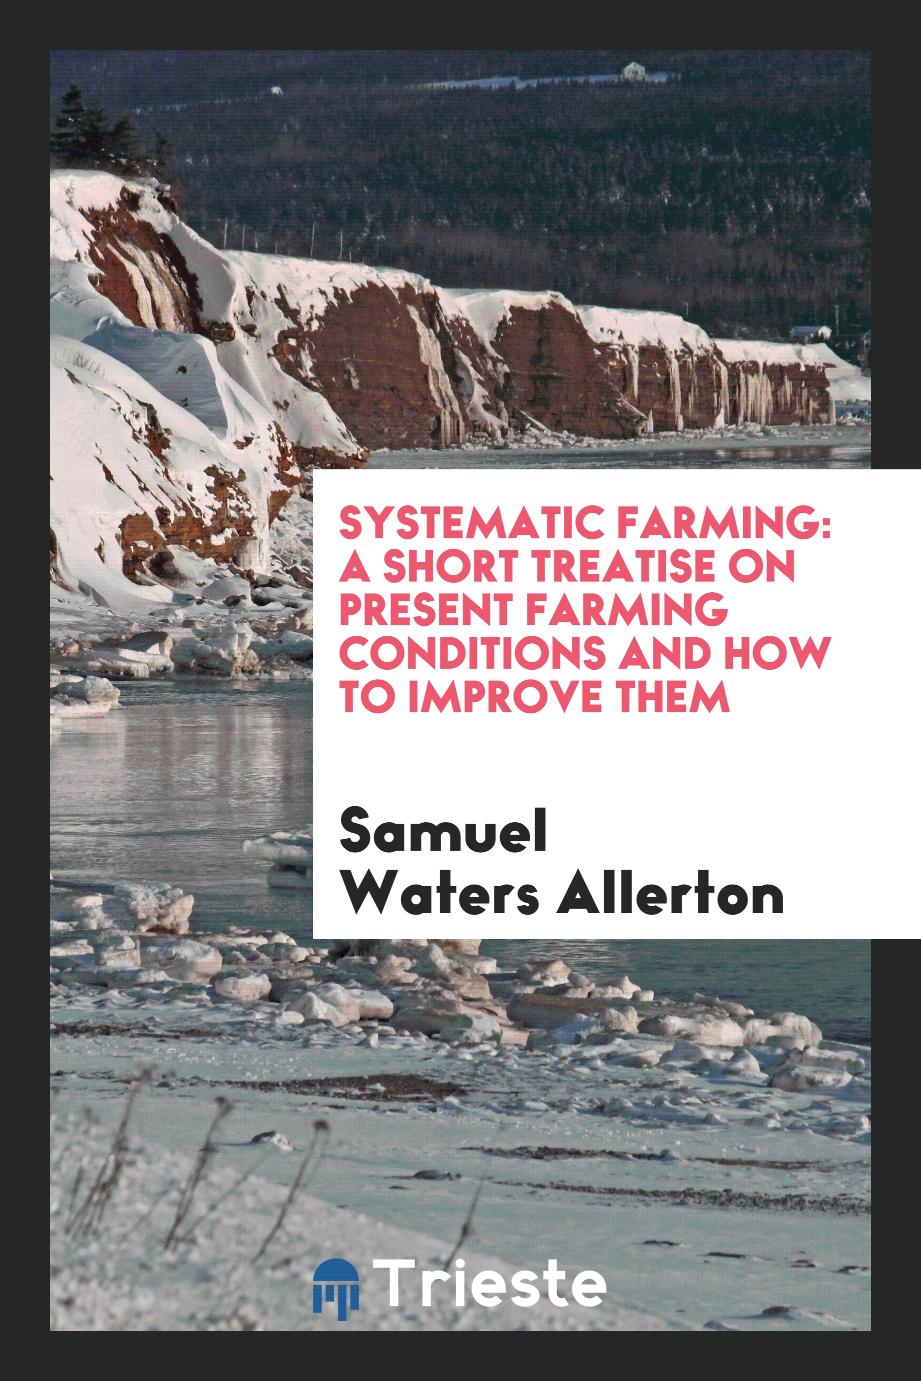 Systematic Farming: A Short Treatise on Present Farming Conditions and how to improve Them